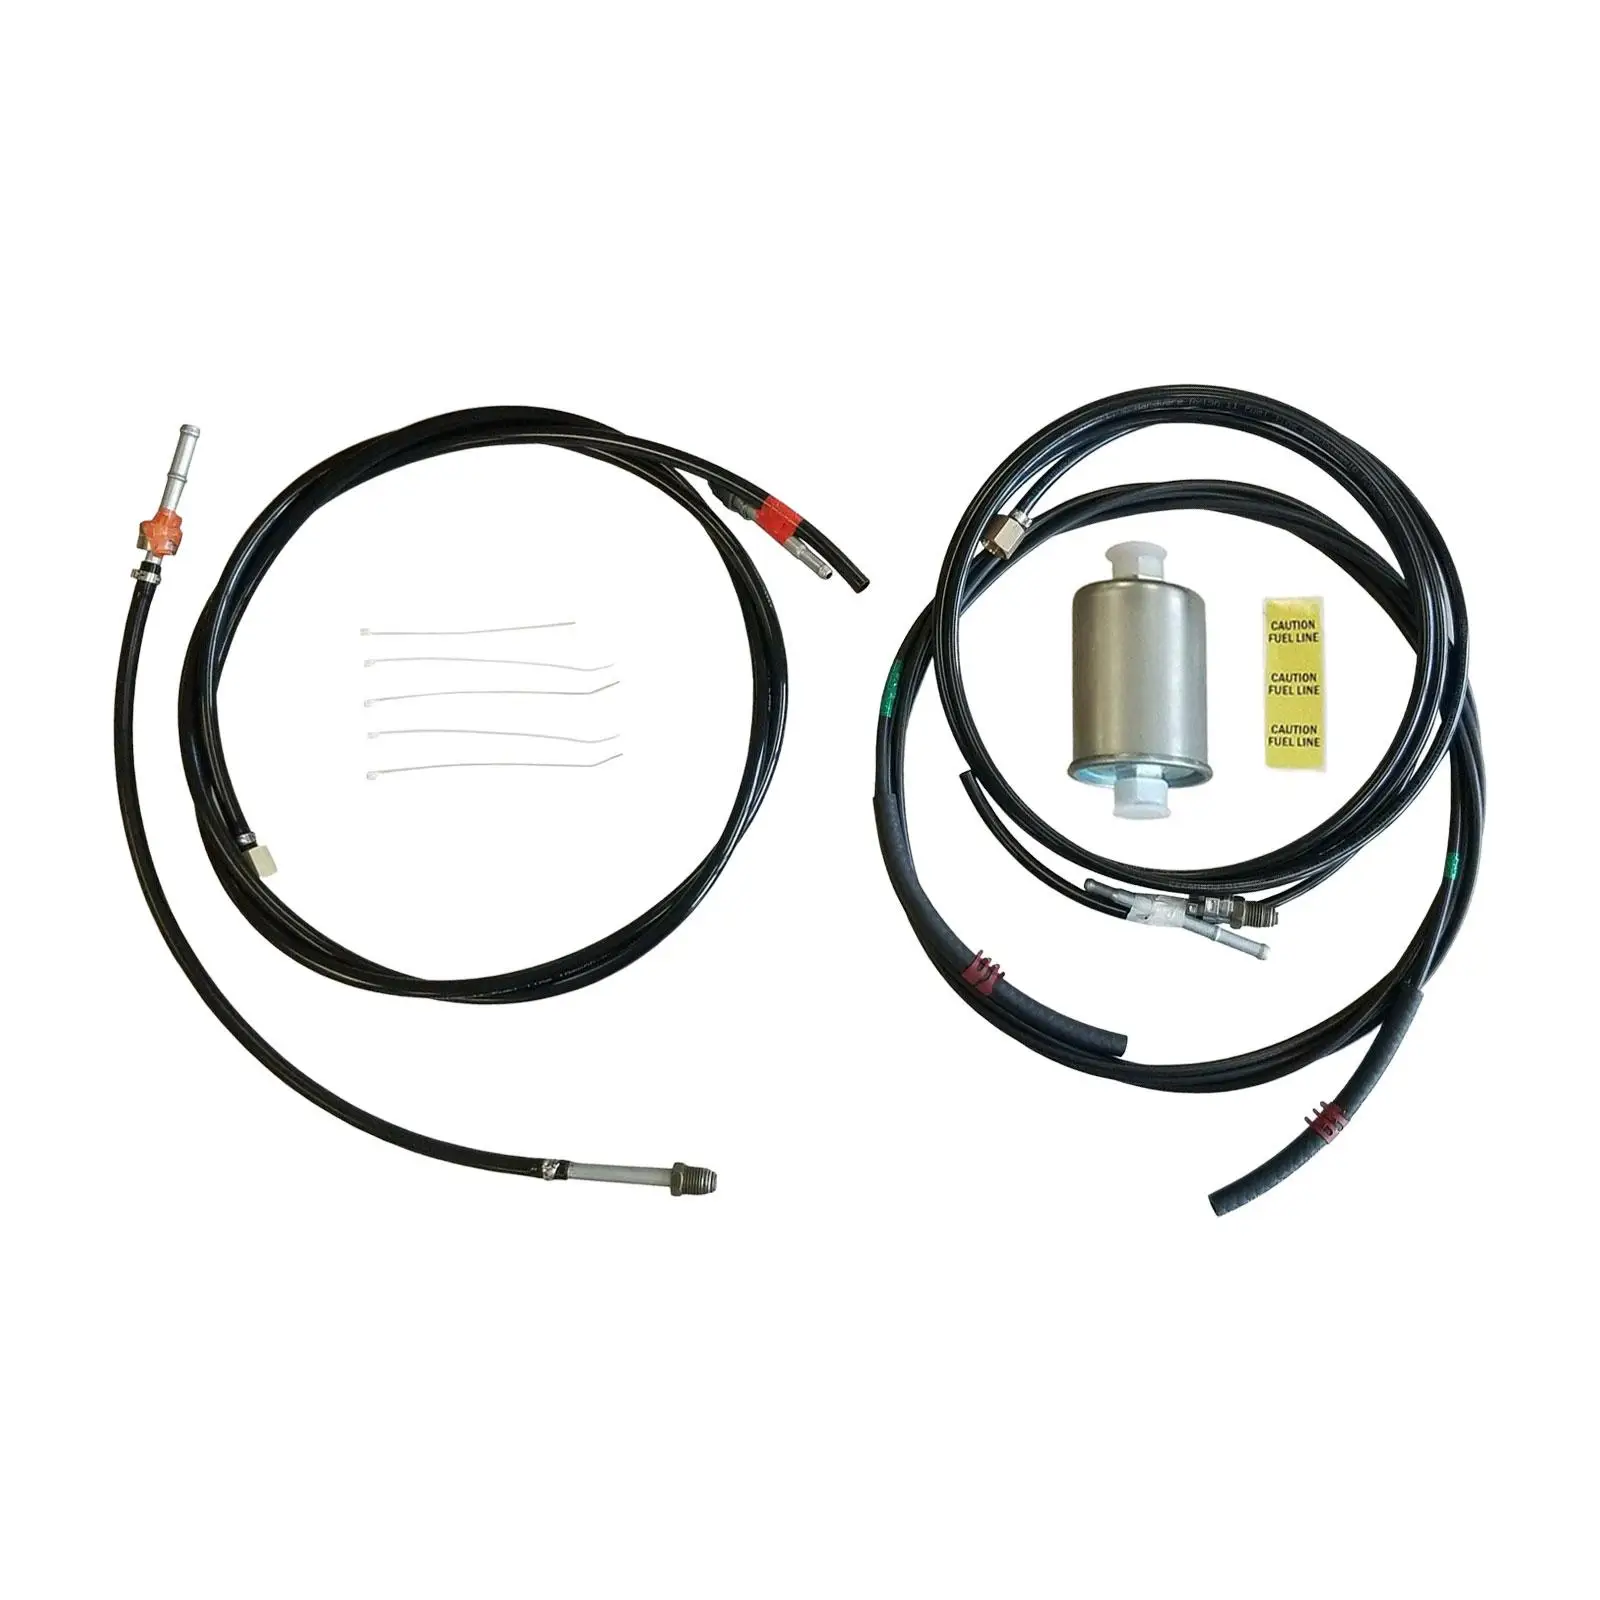 

Fuel Line Kit Nfr0013 Durable Spare Parts Automotive Parts Replacement Tube Set for Chevrolet Easy Installation